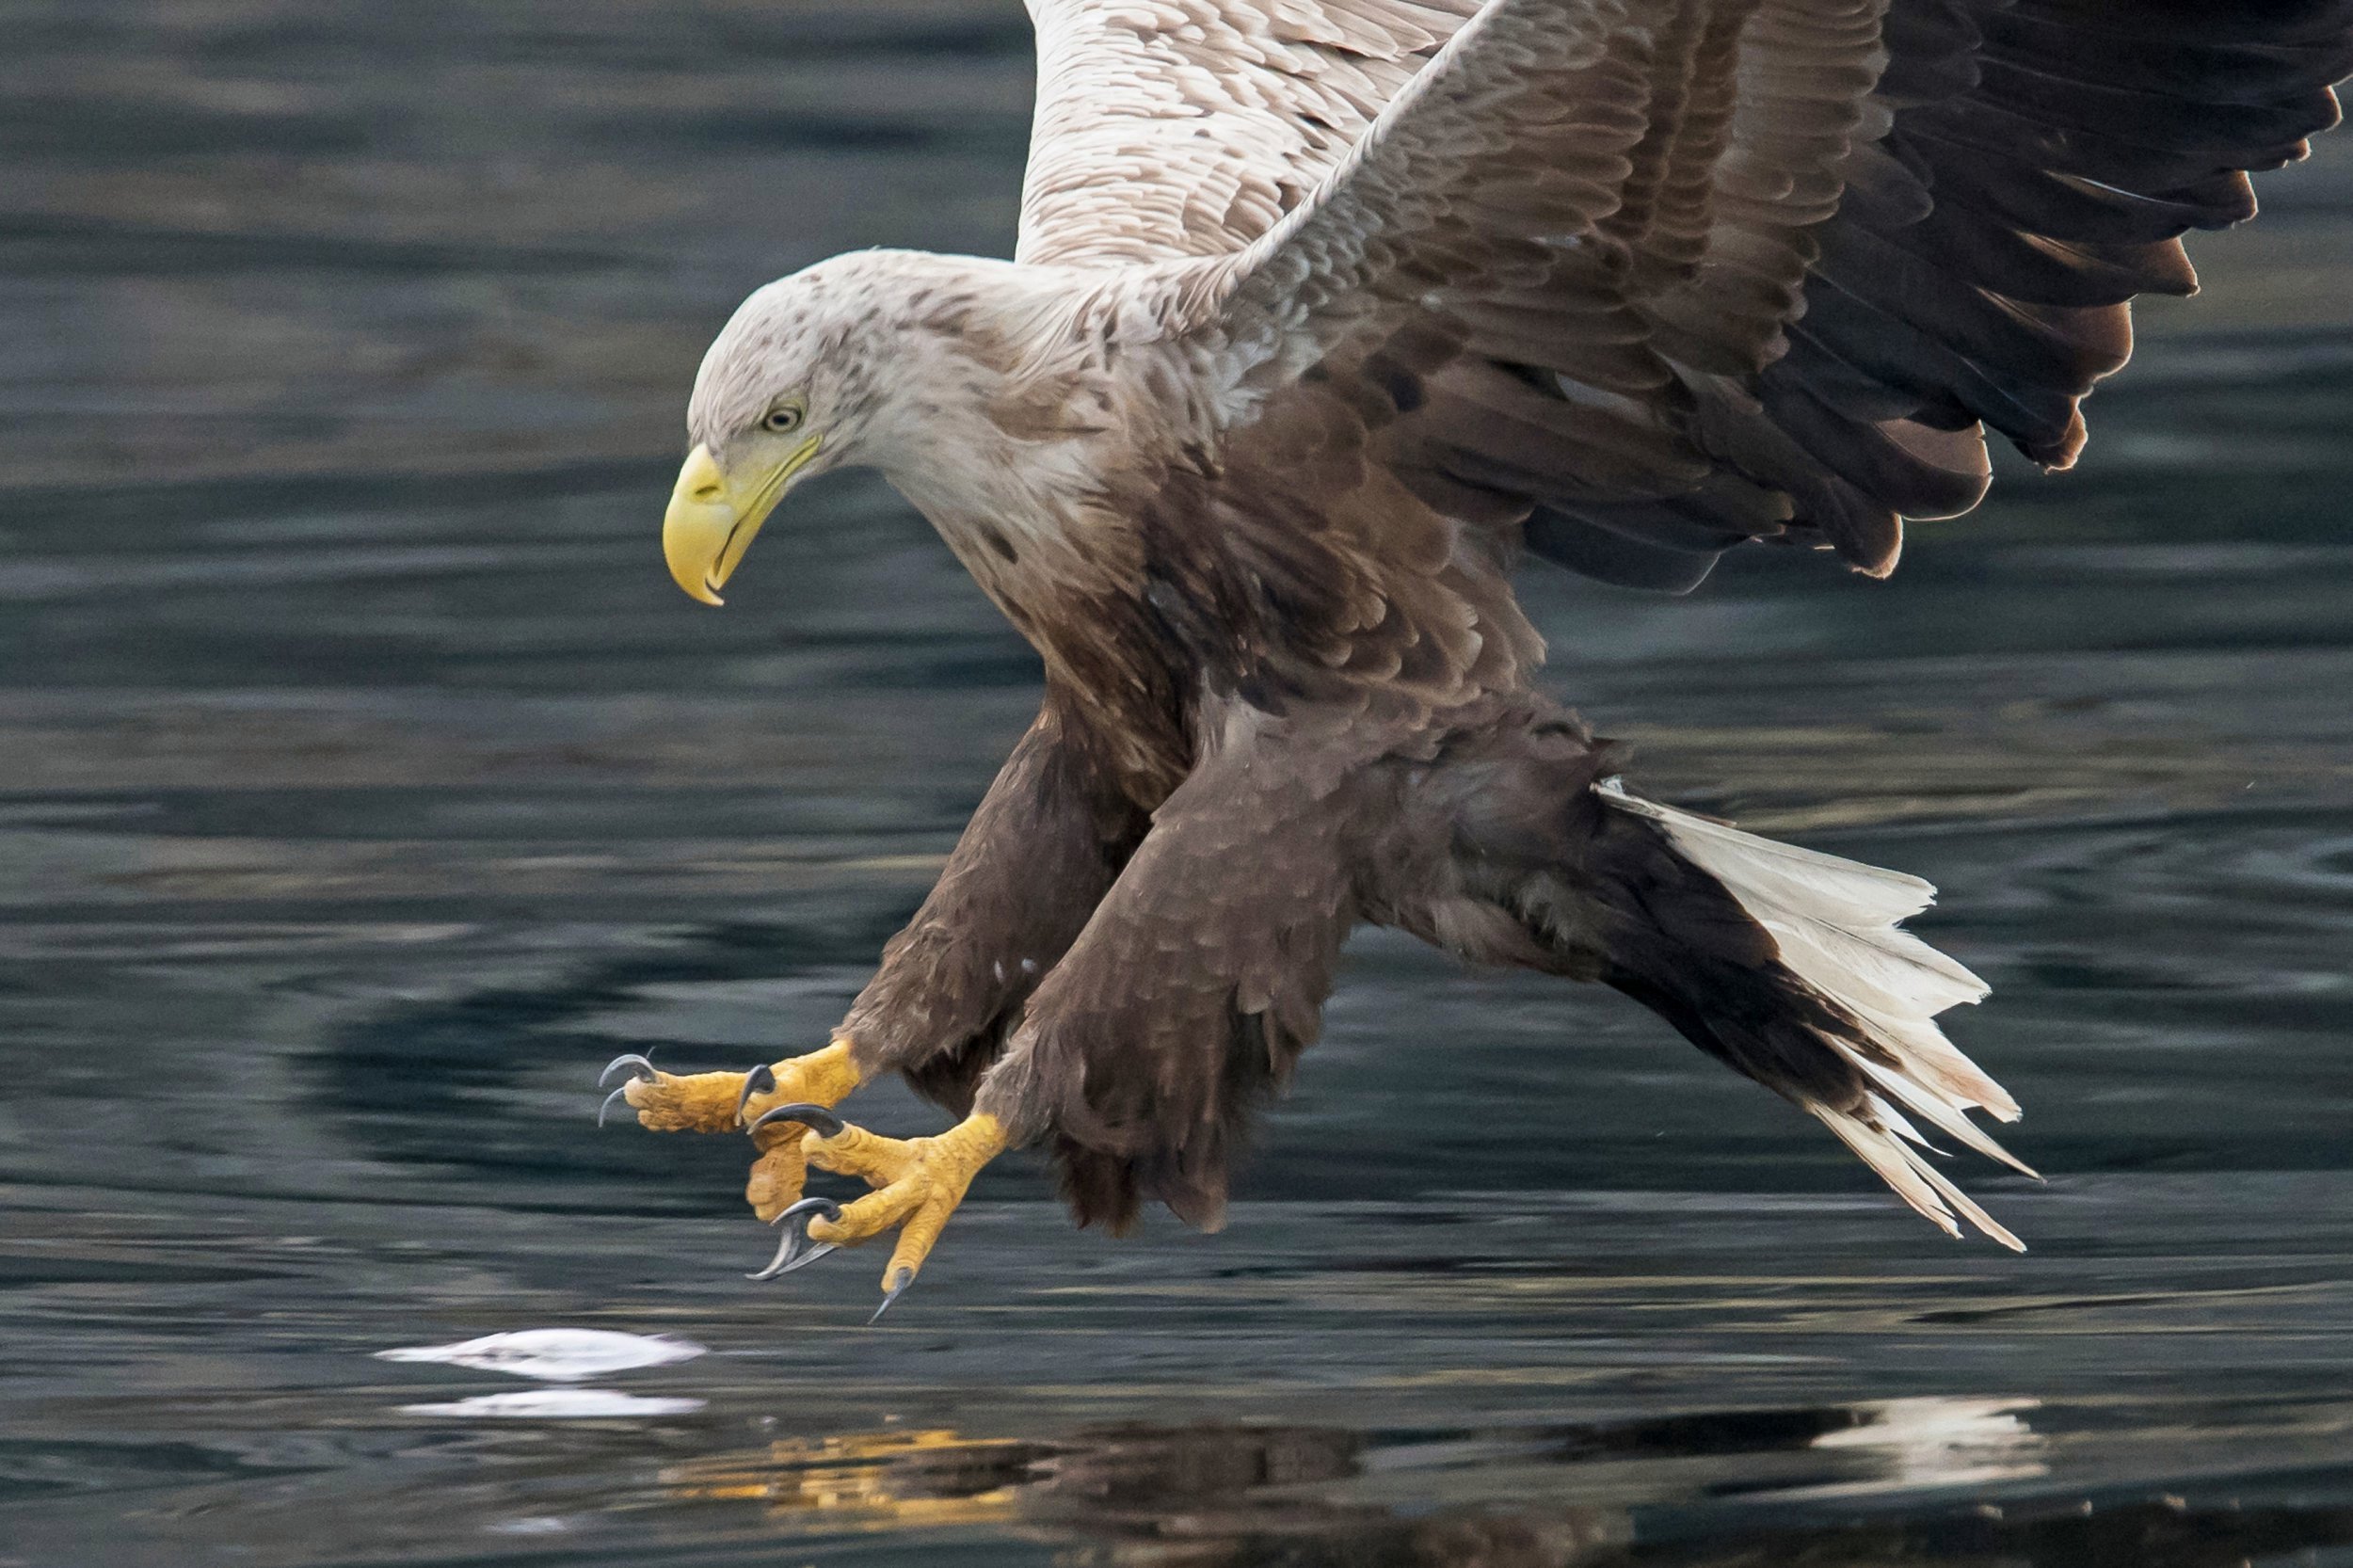 UK- Sea eagle returns to England for first time in 240 years - Tunisia News